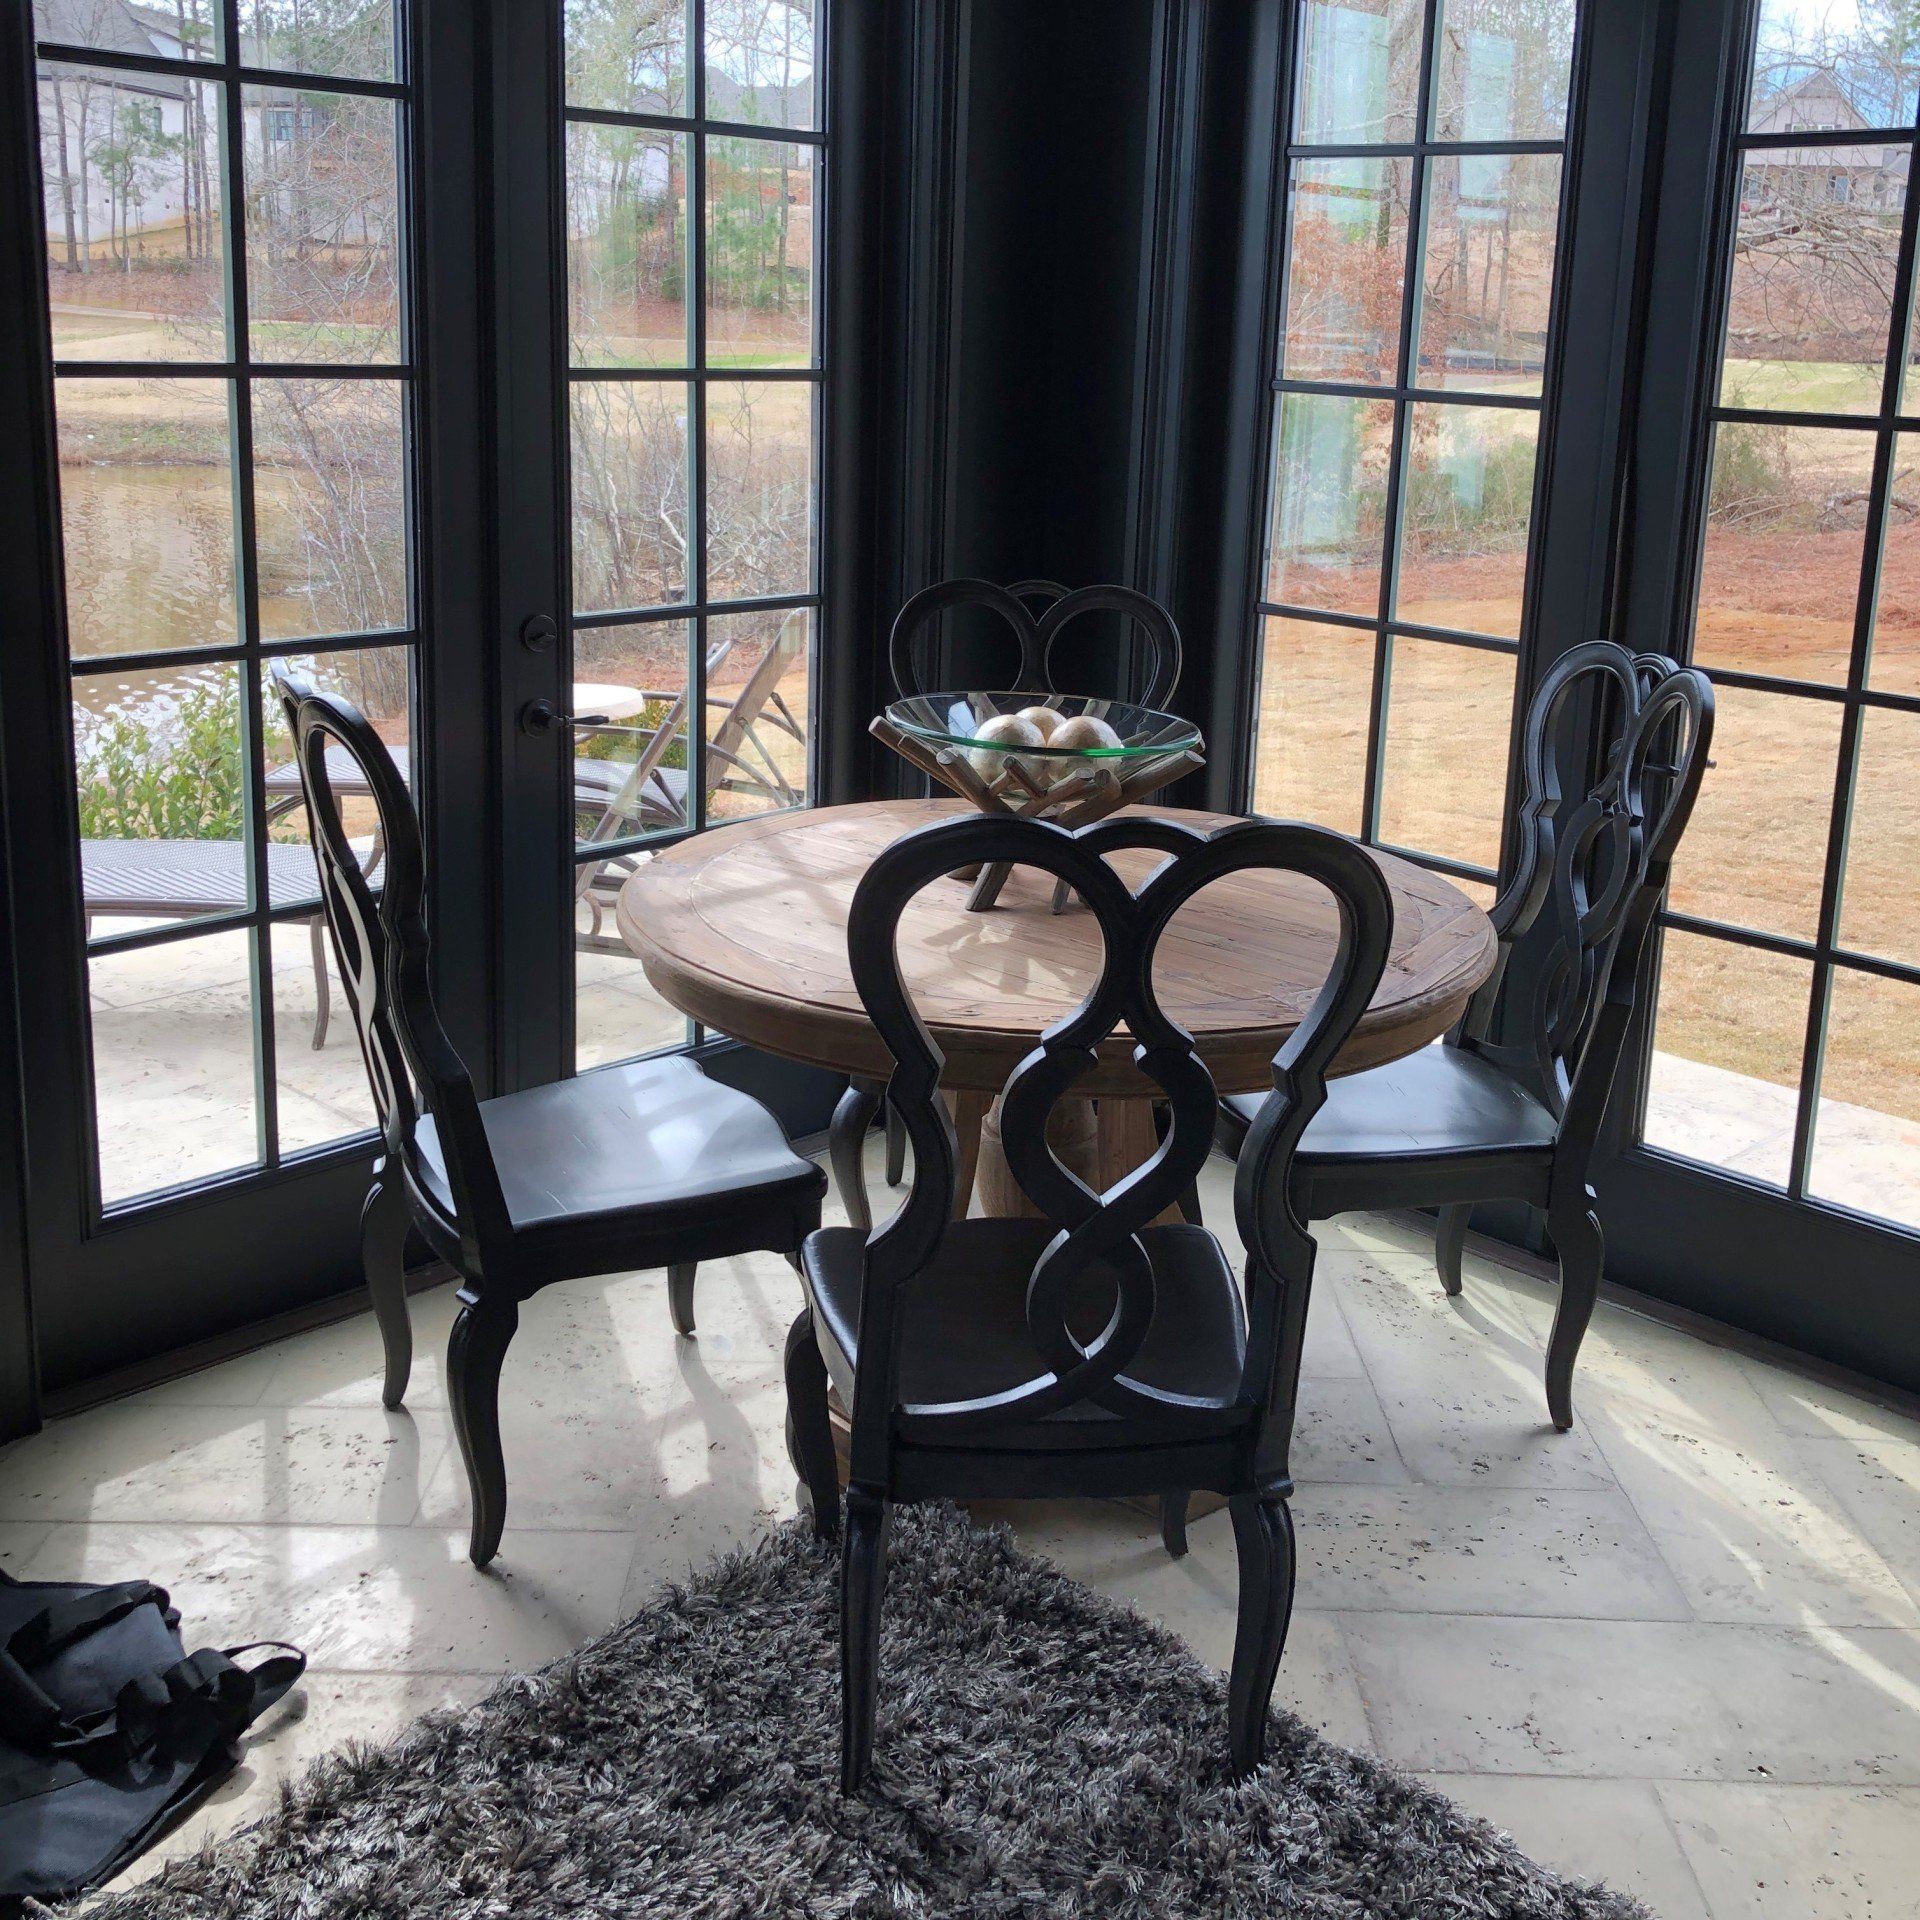 Professional home tint installation - Sun pouring in on floors and furniture before home tint installed in Auburn, AL